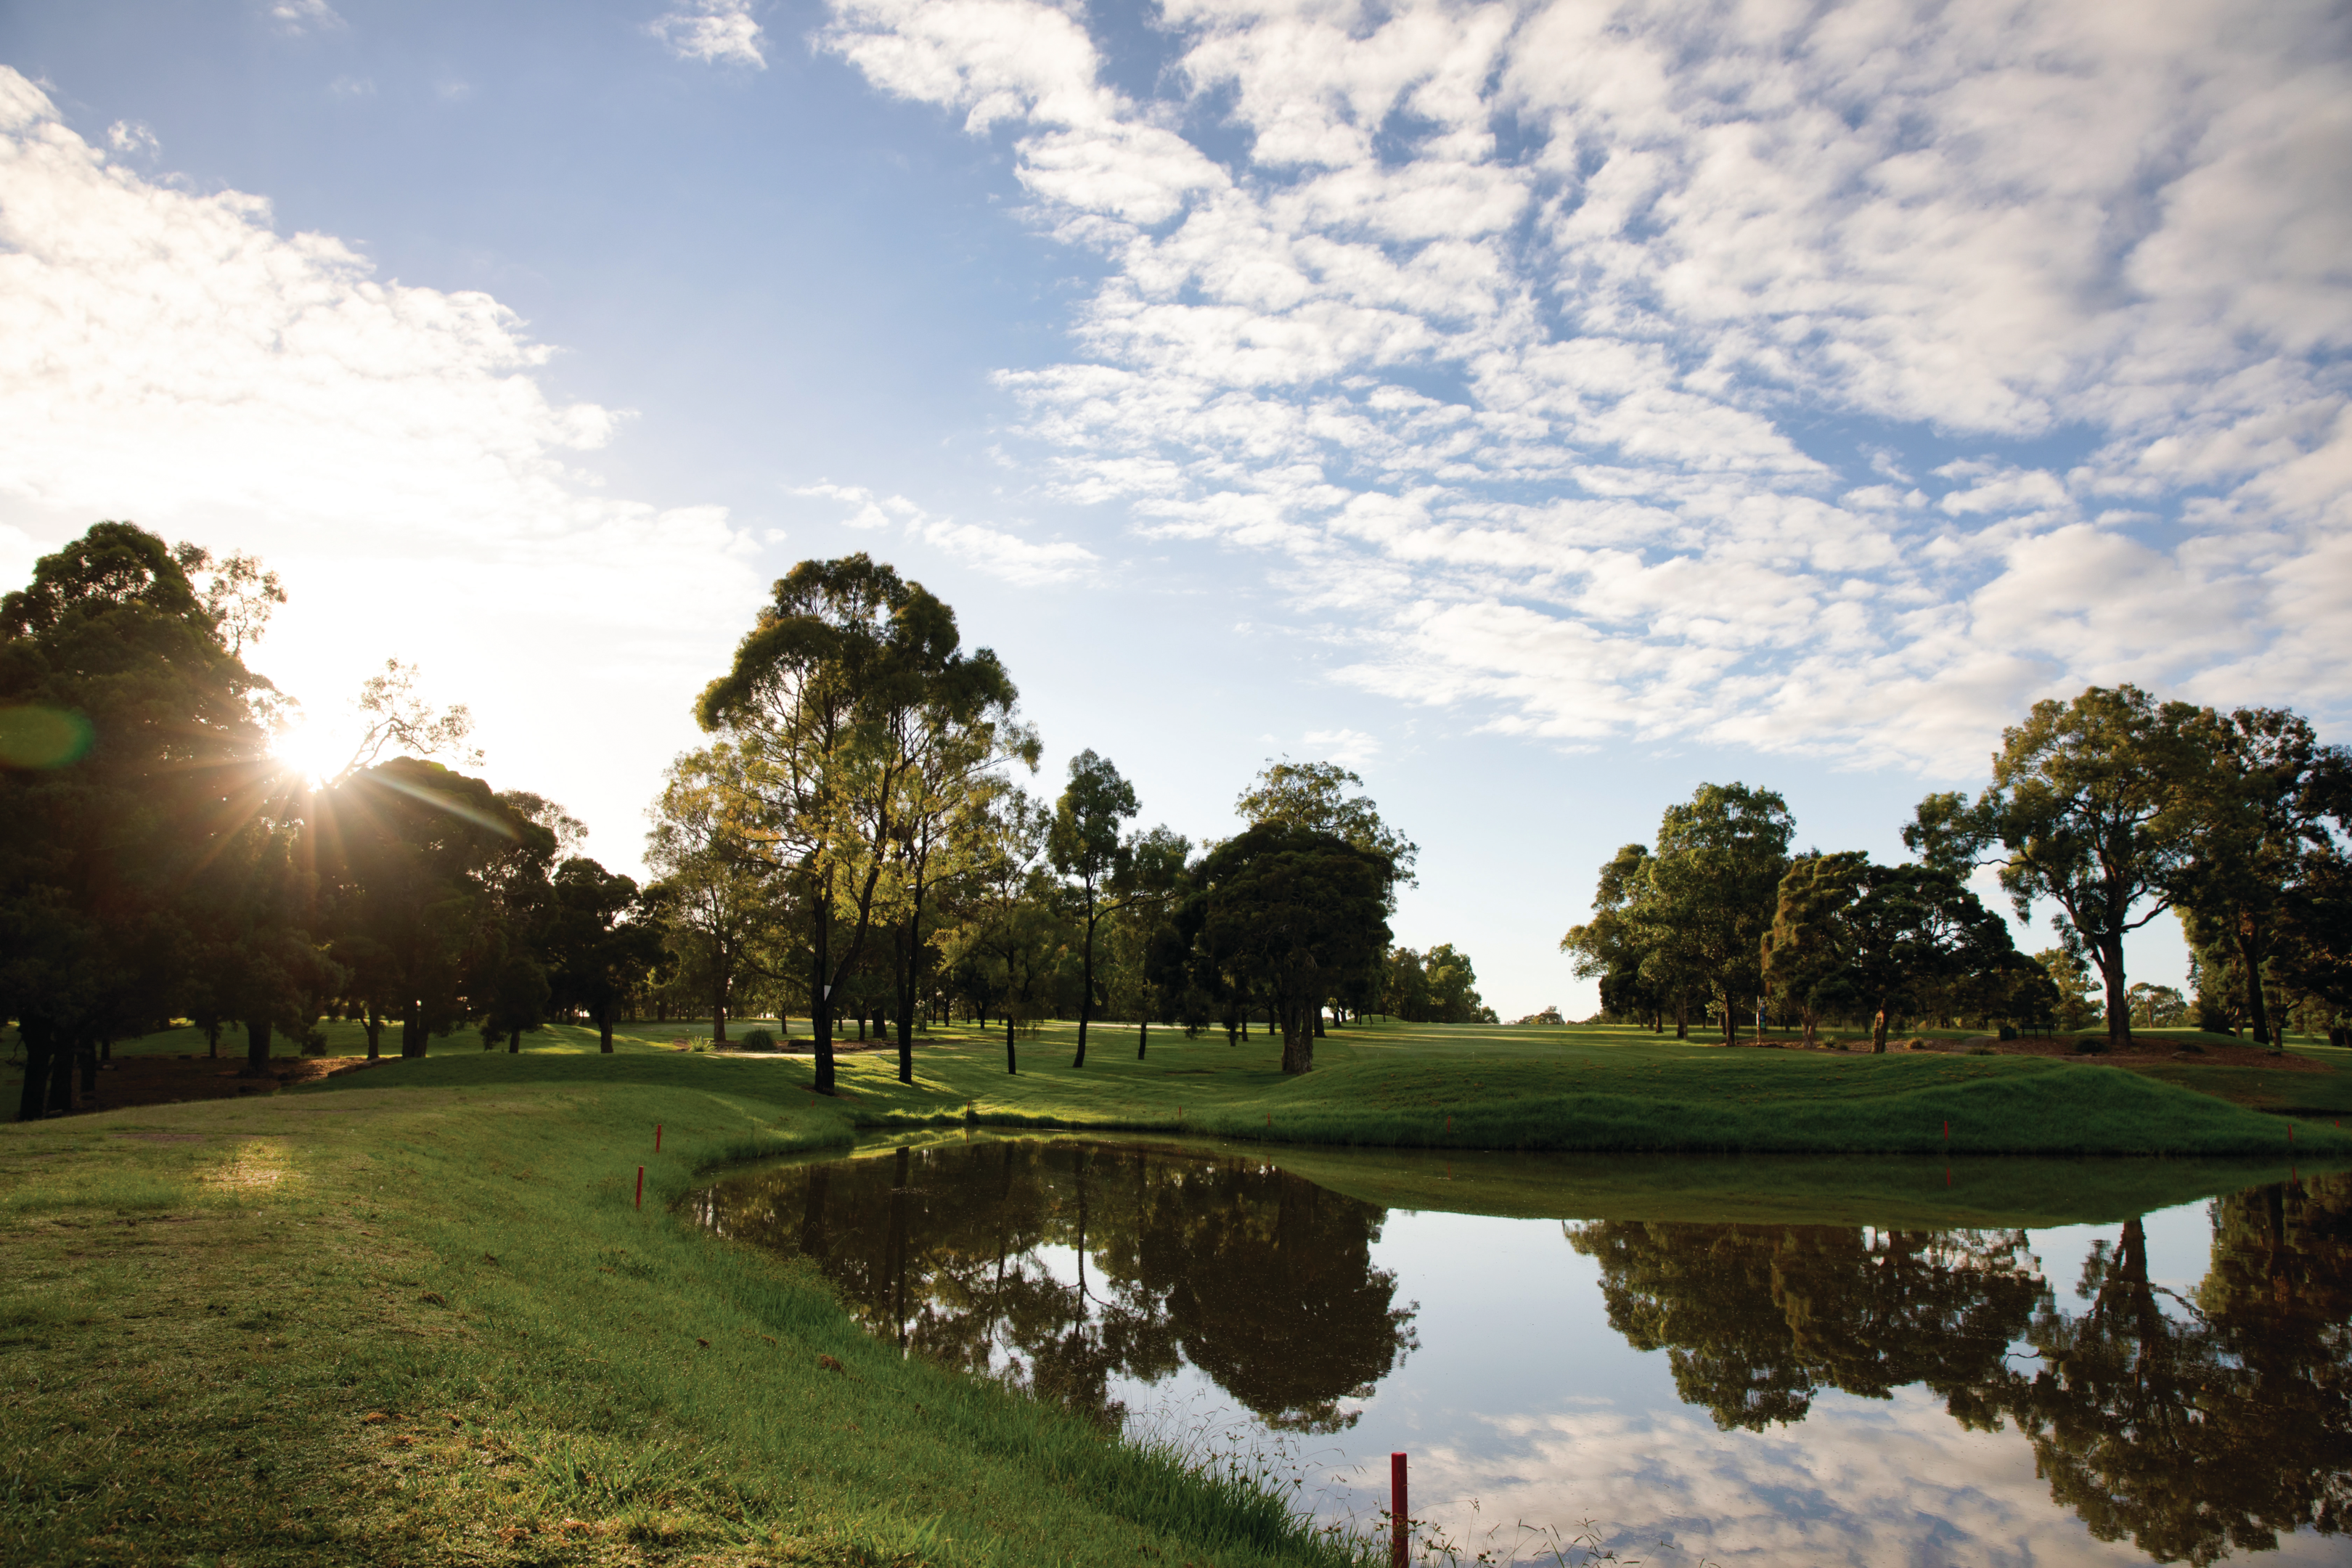 Parklands and Golf Courses are at the centre of Fairfield, where you can purchase affordable real estate in Western Sydney